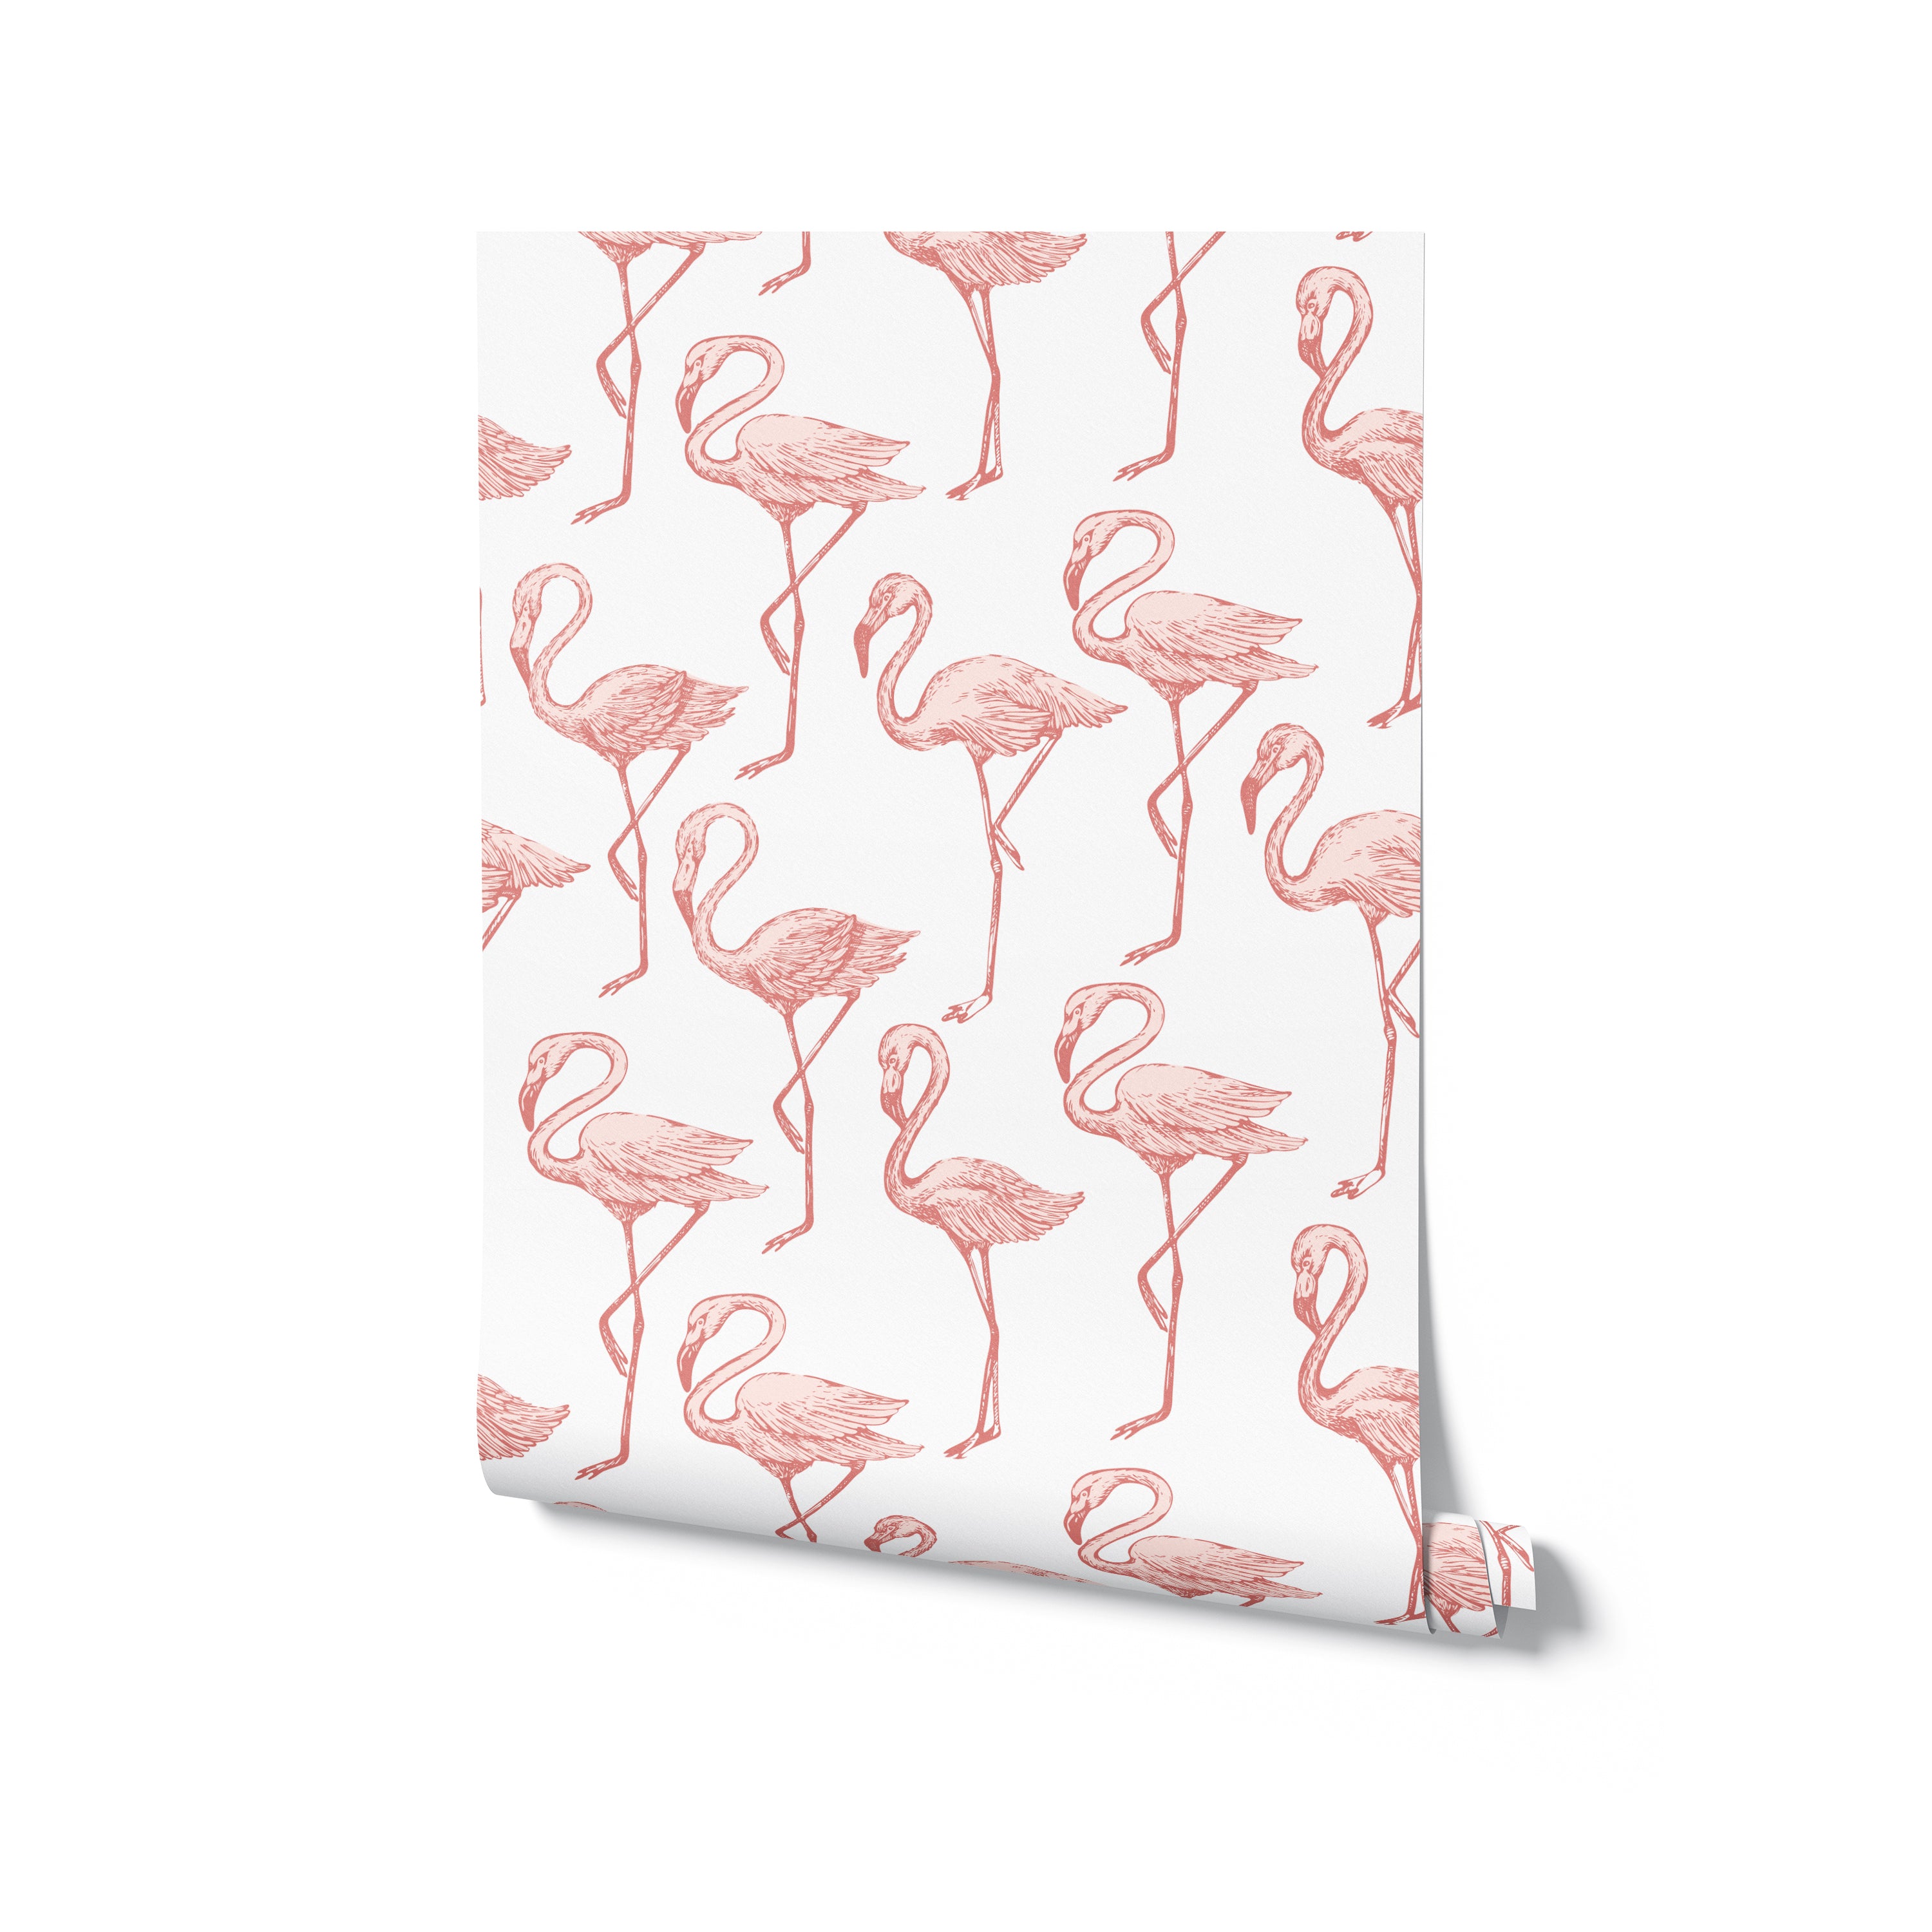 An image of a roll of the Flamingo Party Wallpaper, showing the unique and cheerful pattern of pink flamingos on a white background, perfect for adding a lively and tropical touch to any room’s decor.